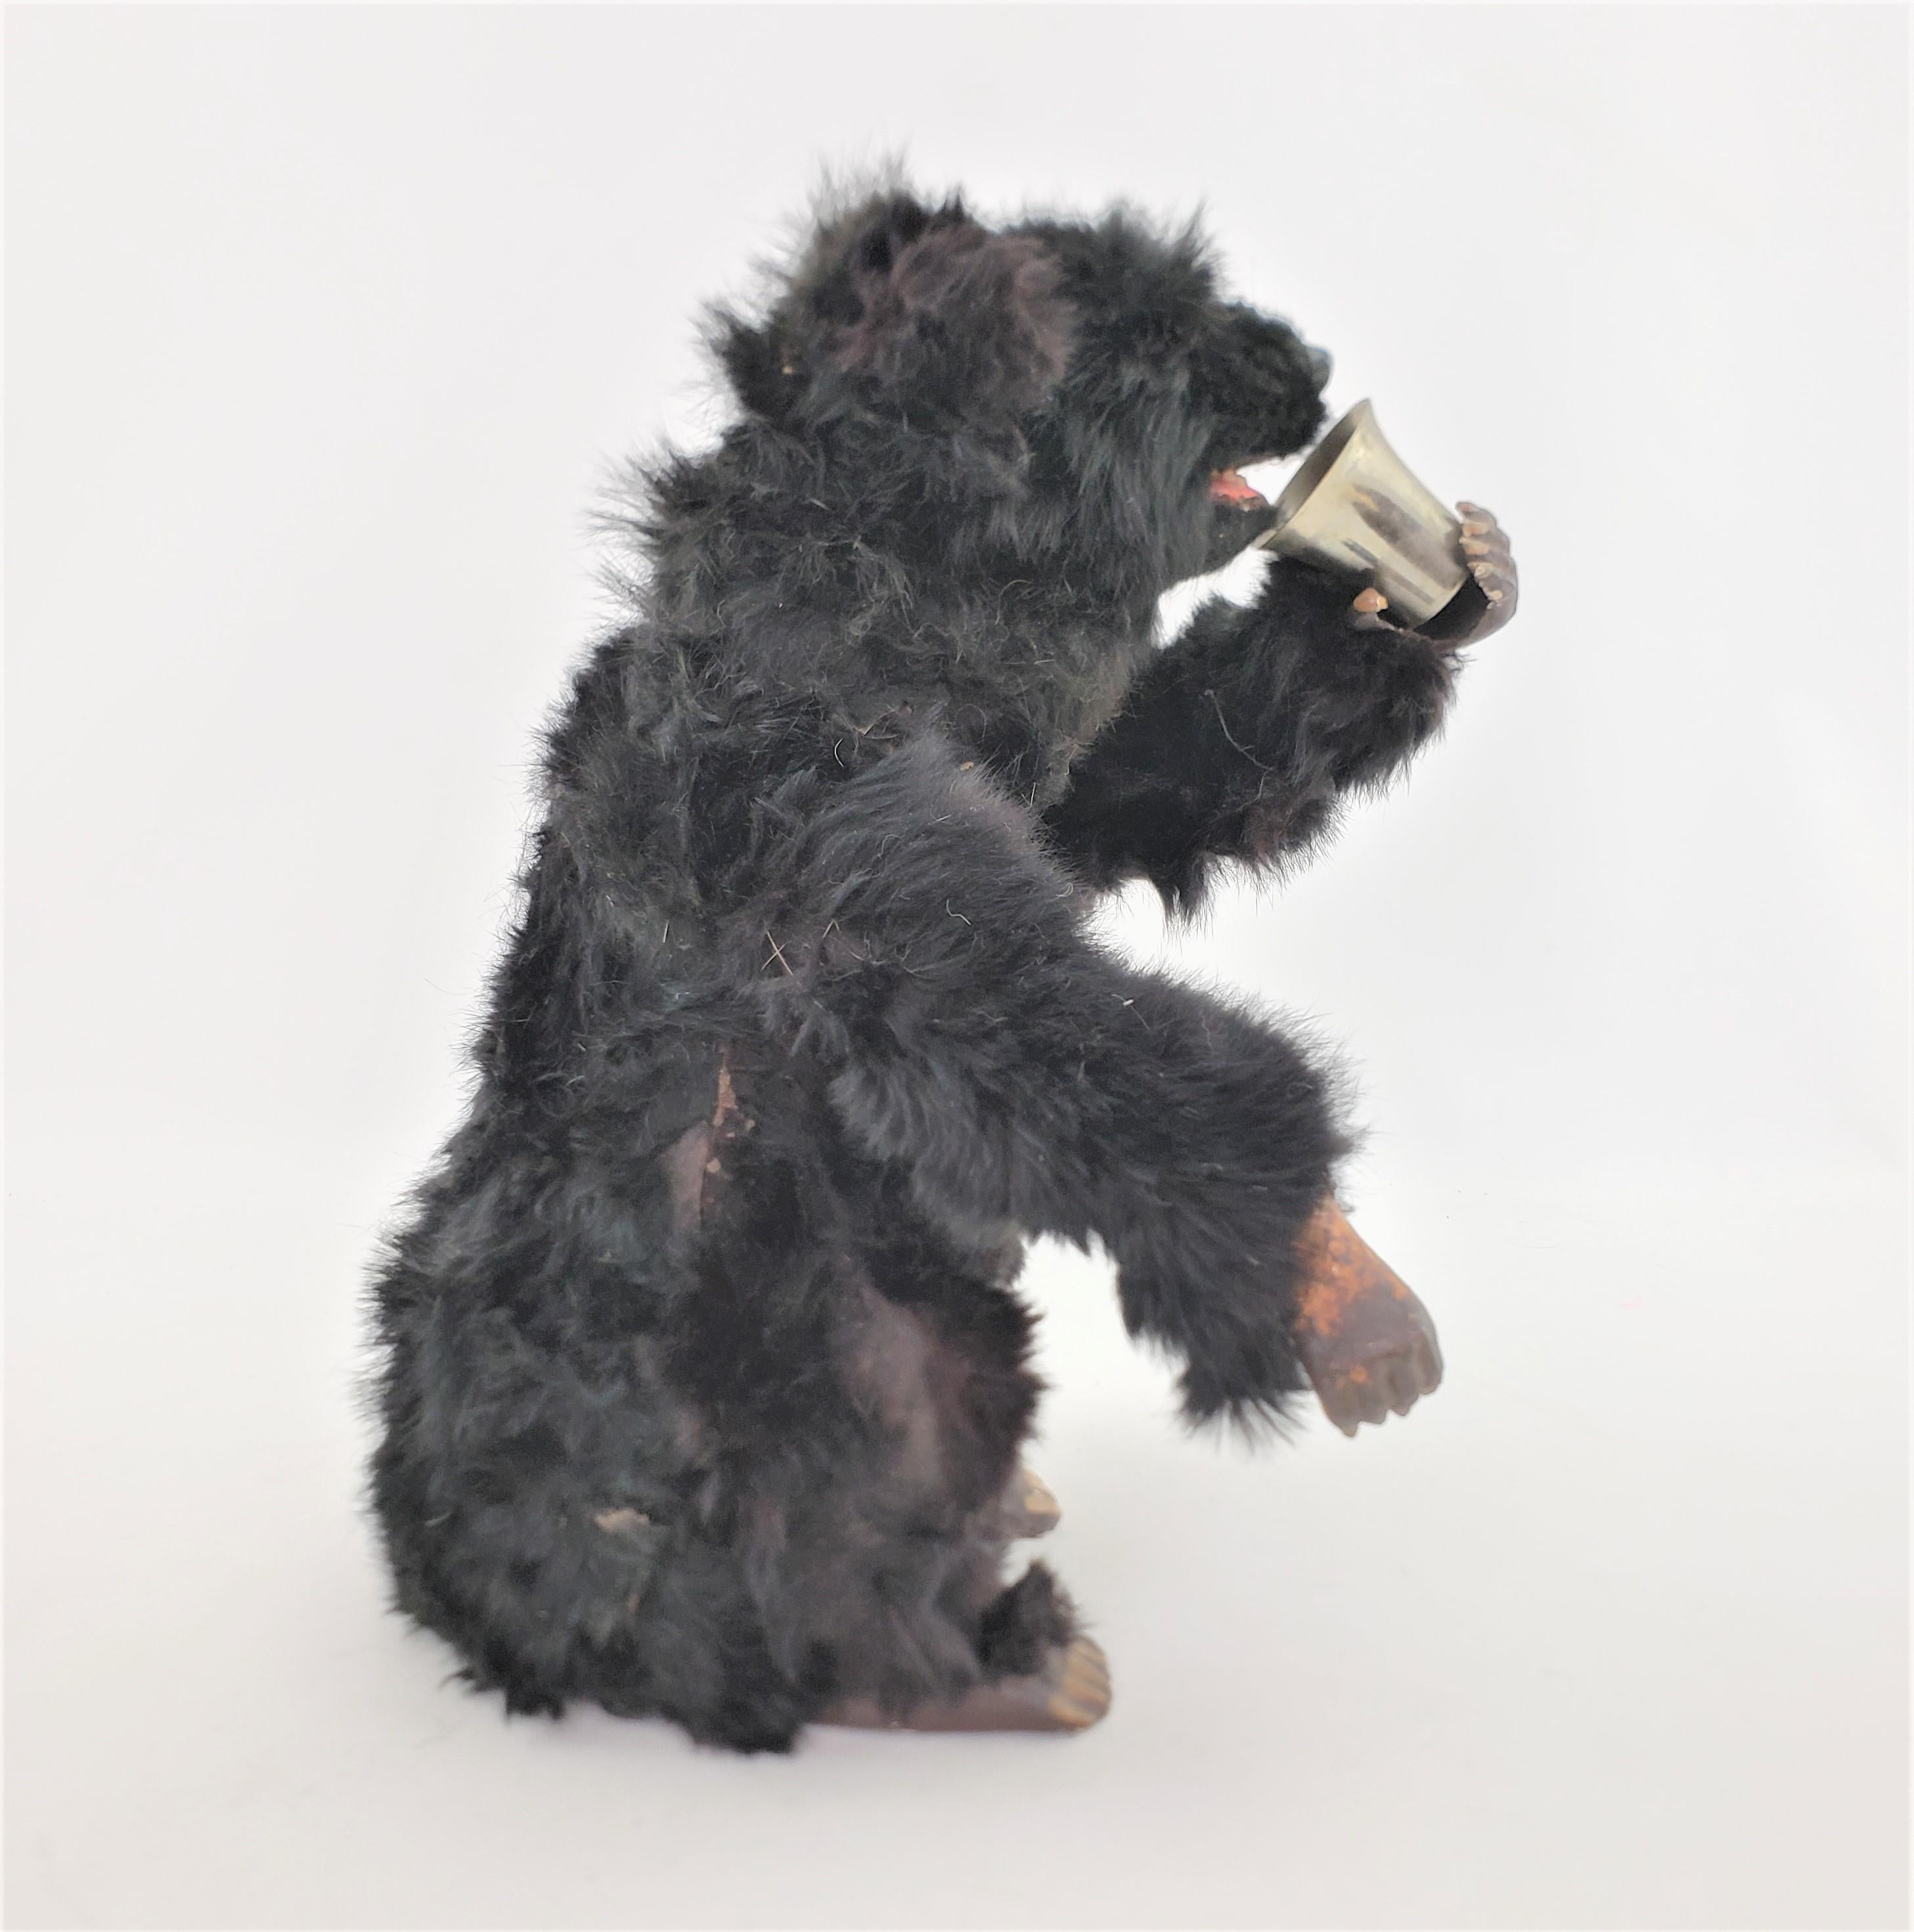 Austrian Antique Victorian Key Wind Mechanical Large Black Bear Child's Toy, As Found For Sale